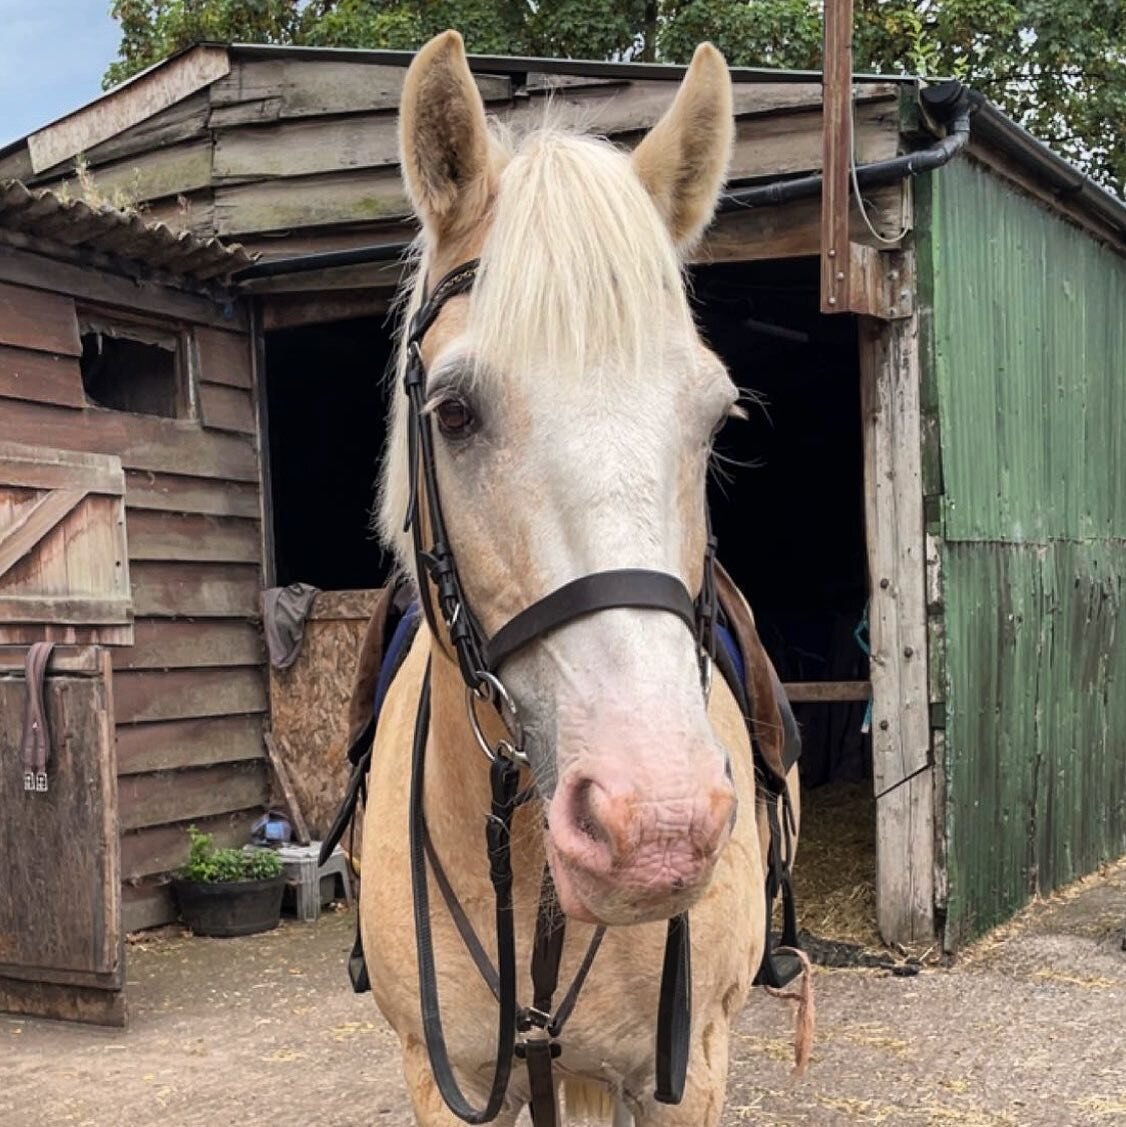 ⭐️ 𝐈𝐧𝐭𝐫𝐨𝐝𝐮𝐜𝐢𝐧𝐠 . . . Sky! He&rsquo;s a lovely gentle giant, has heaps of personality and will be your best pal if you itch the right spots! Enjoy&rsquo;s hacking and loves a bit of a fuss! ⭐️ #pony#riding#horse#horse-riding#ukridingschool#